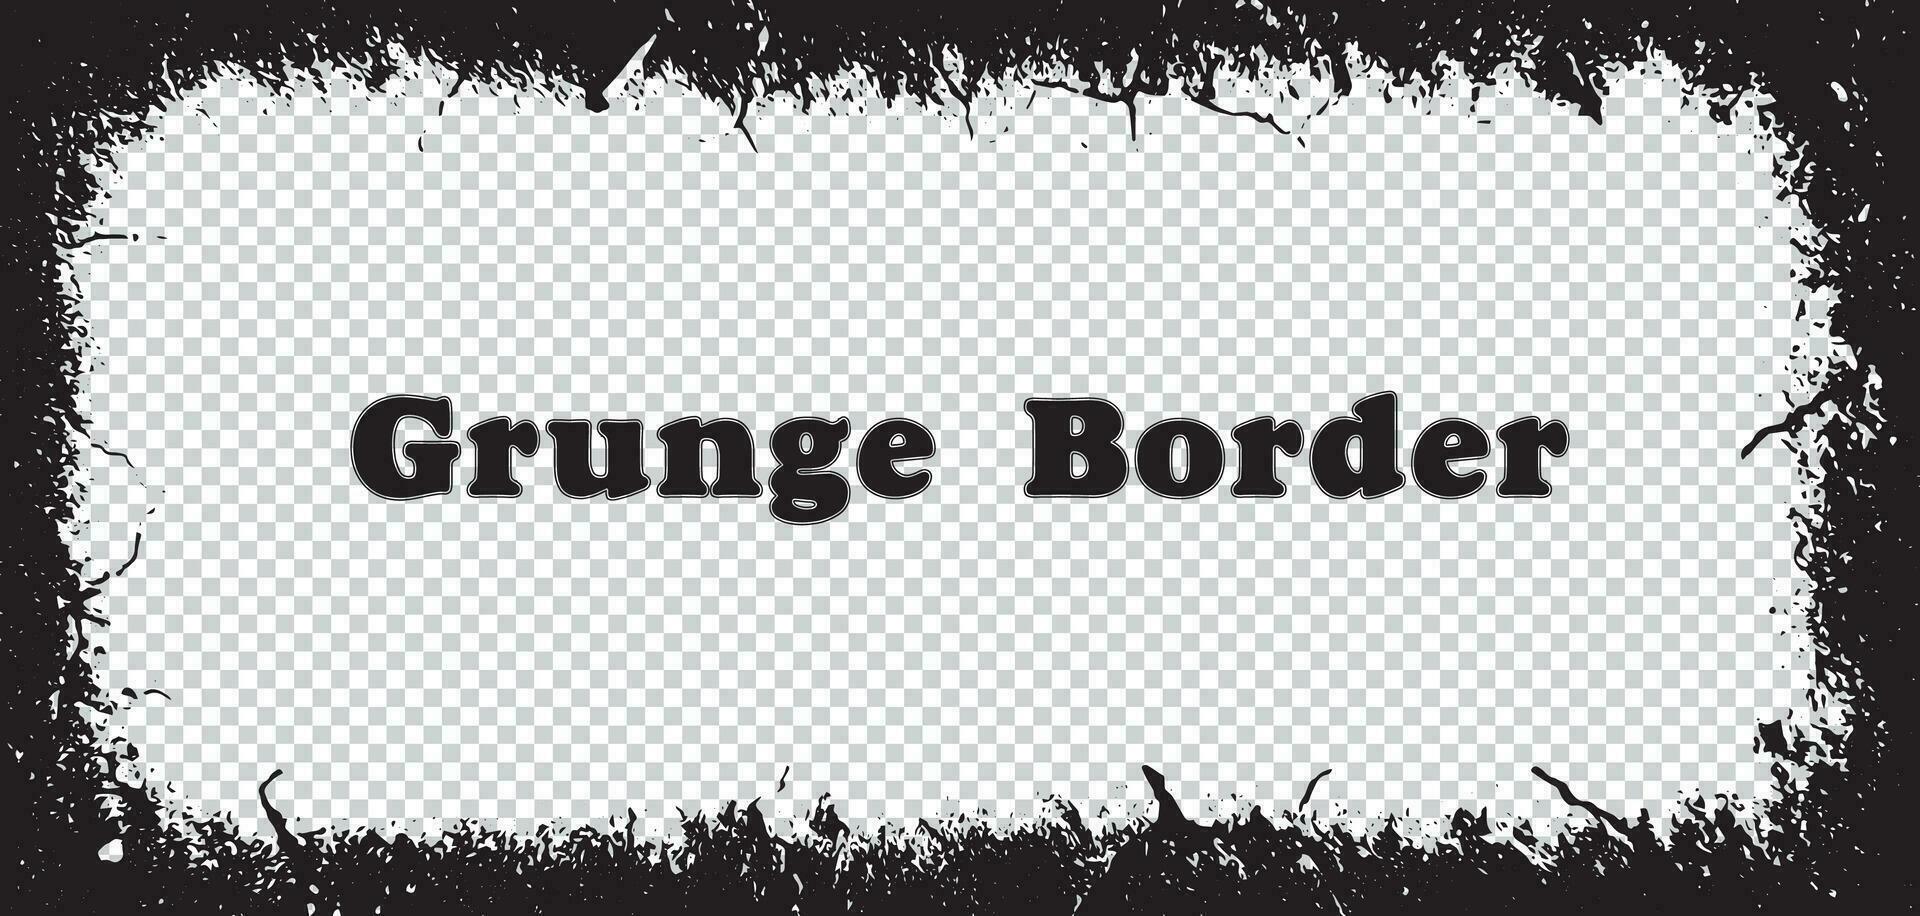 grunge border with black and white text, grunge border, grunge frame grungy, abstract vector